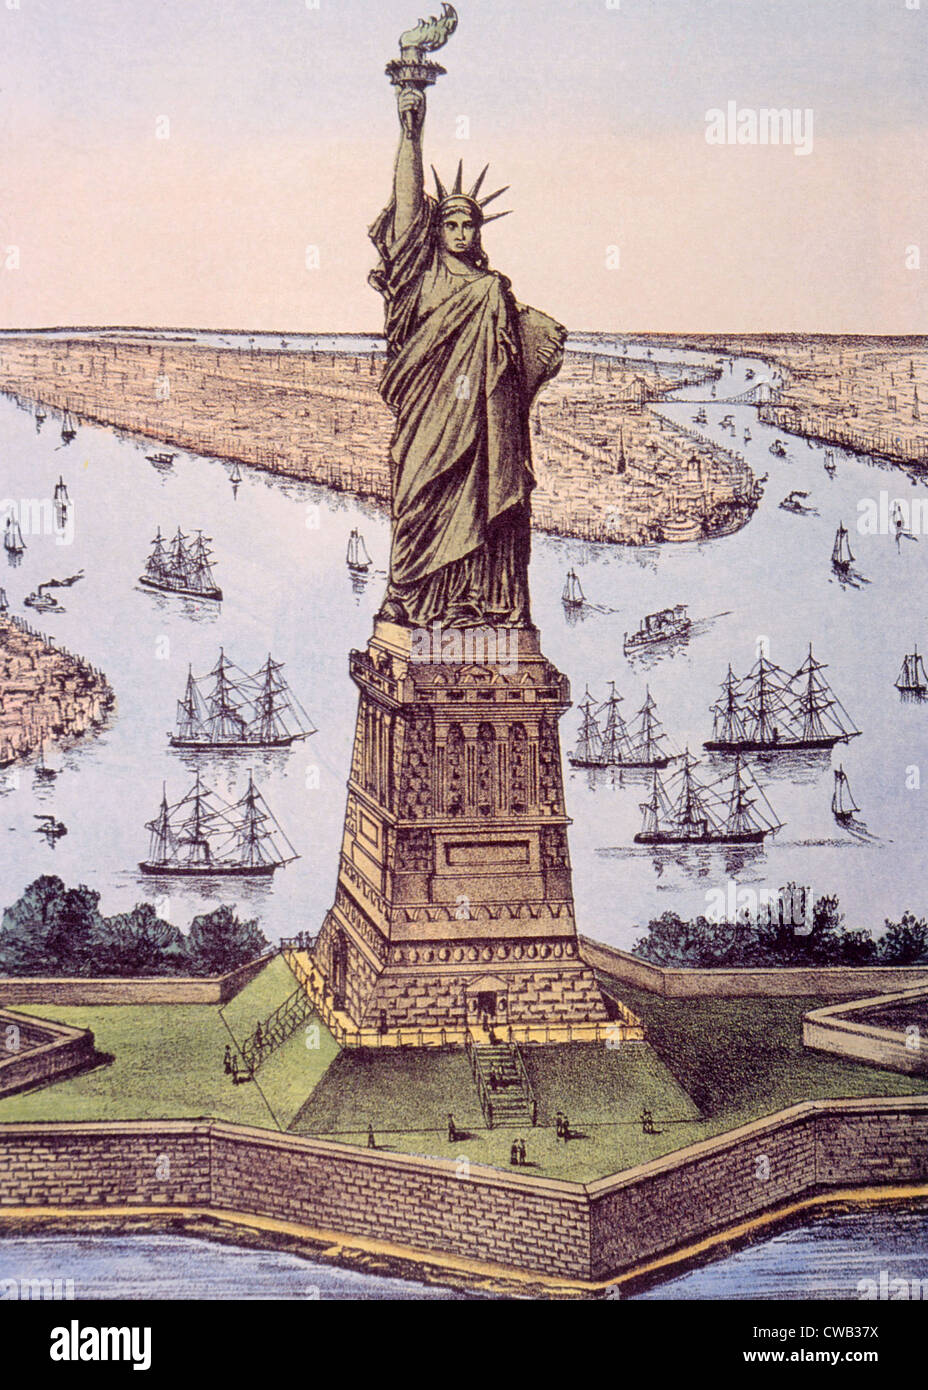 The Statue of Liberty (aka The Great Bertholdi Statue), lithograph by Currier & Ives, 1885 Stock Photo